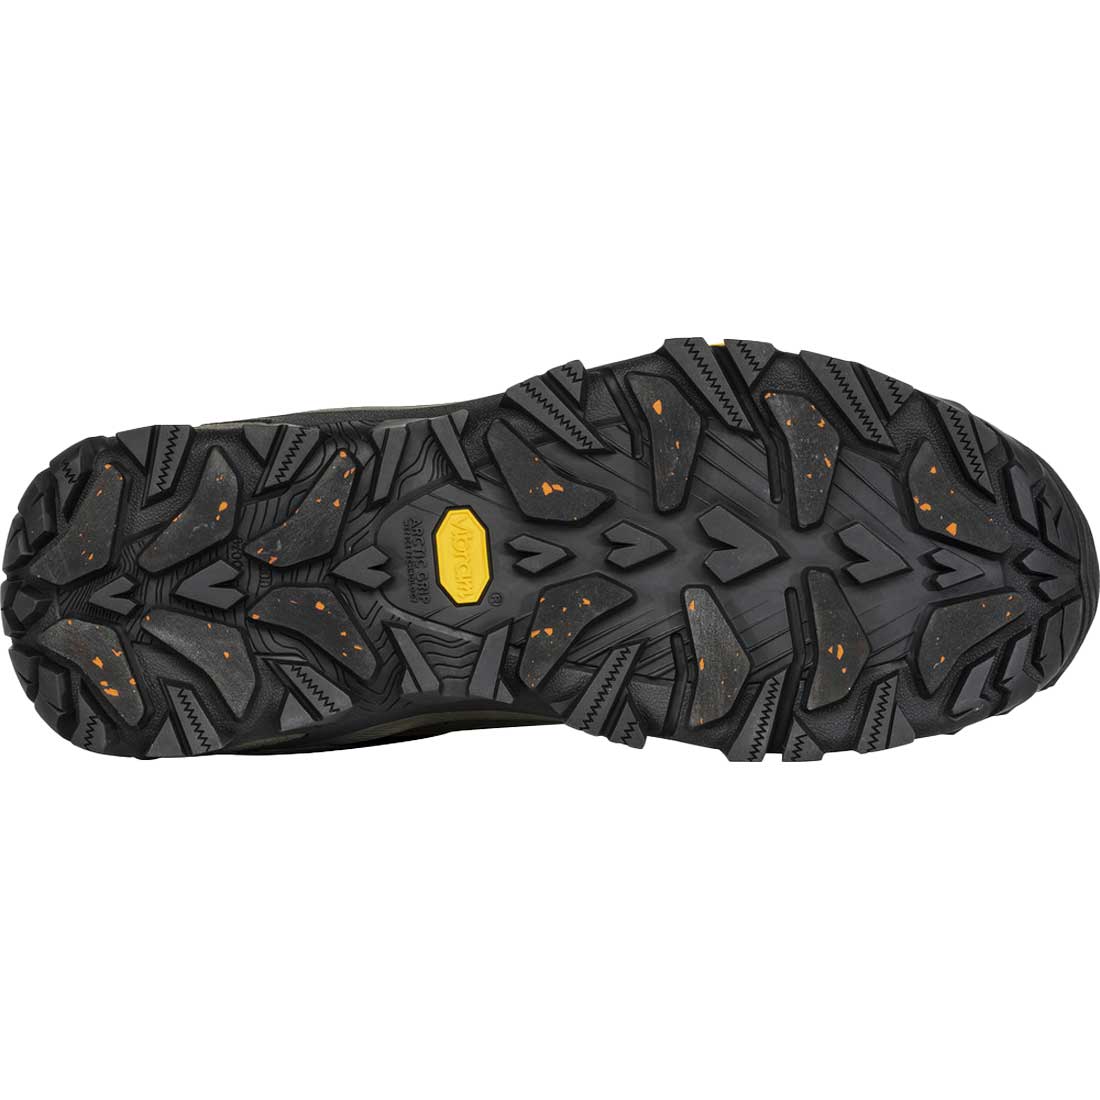 Oboz Bangtail Mid Insulated Waterproof - Men's